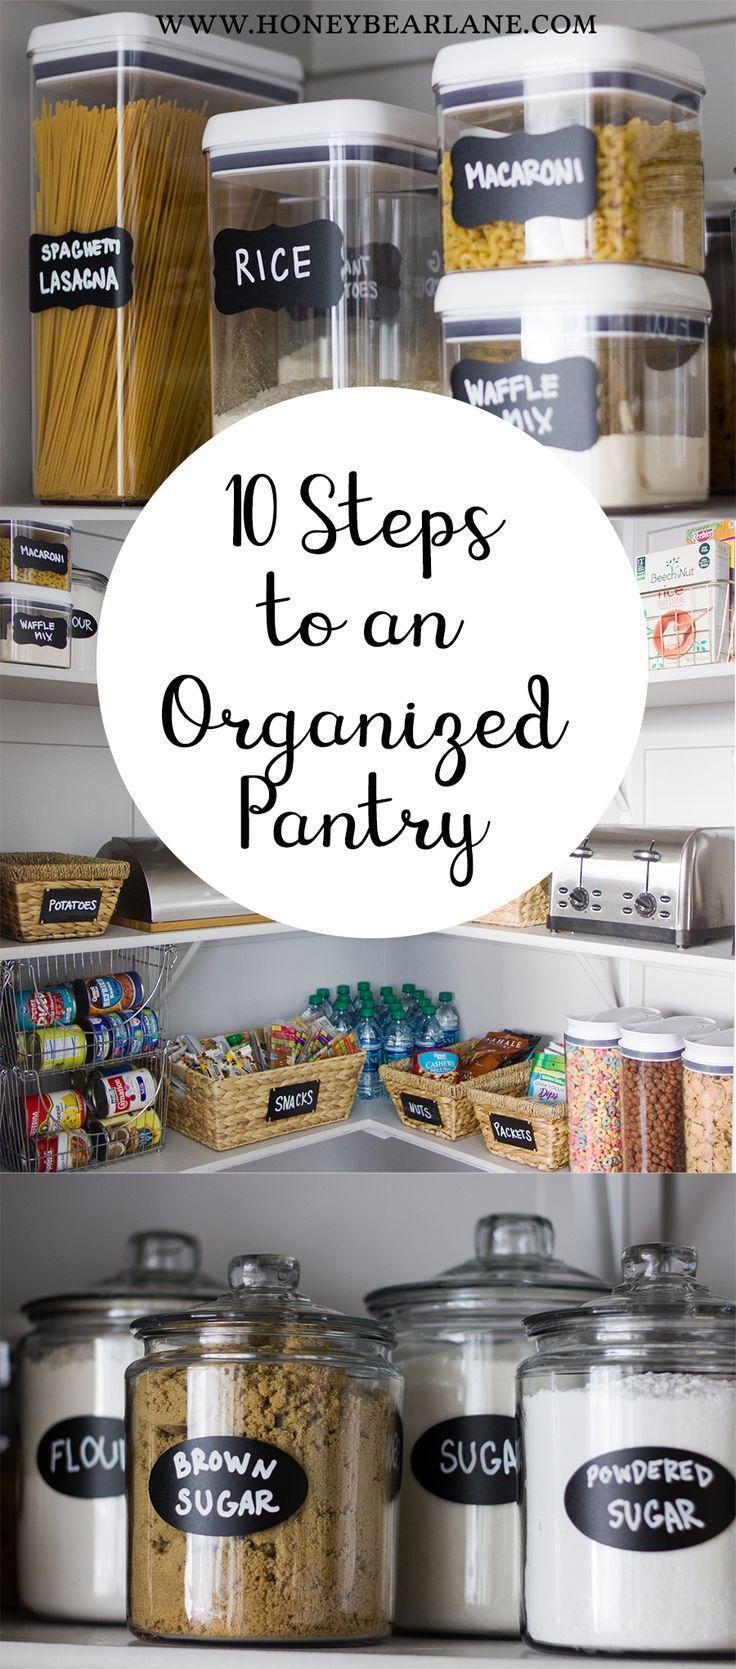 10 Steps to an Organized Pantry -   24 diy food pantry
 ideas